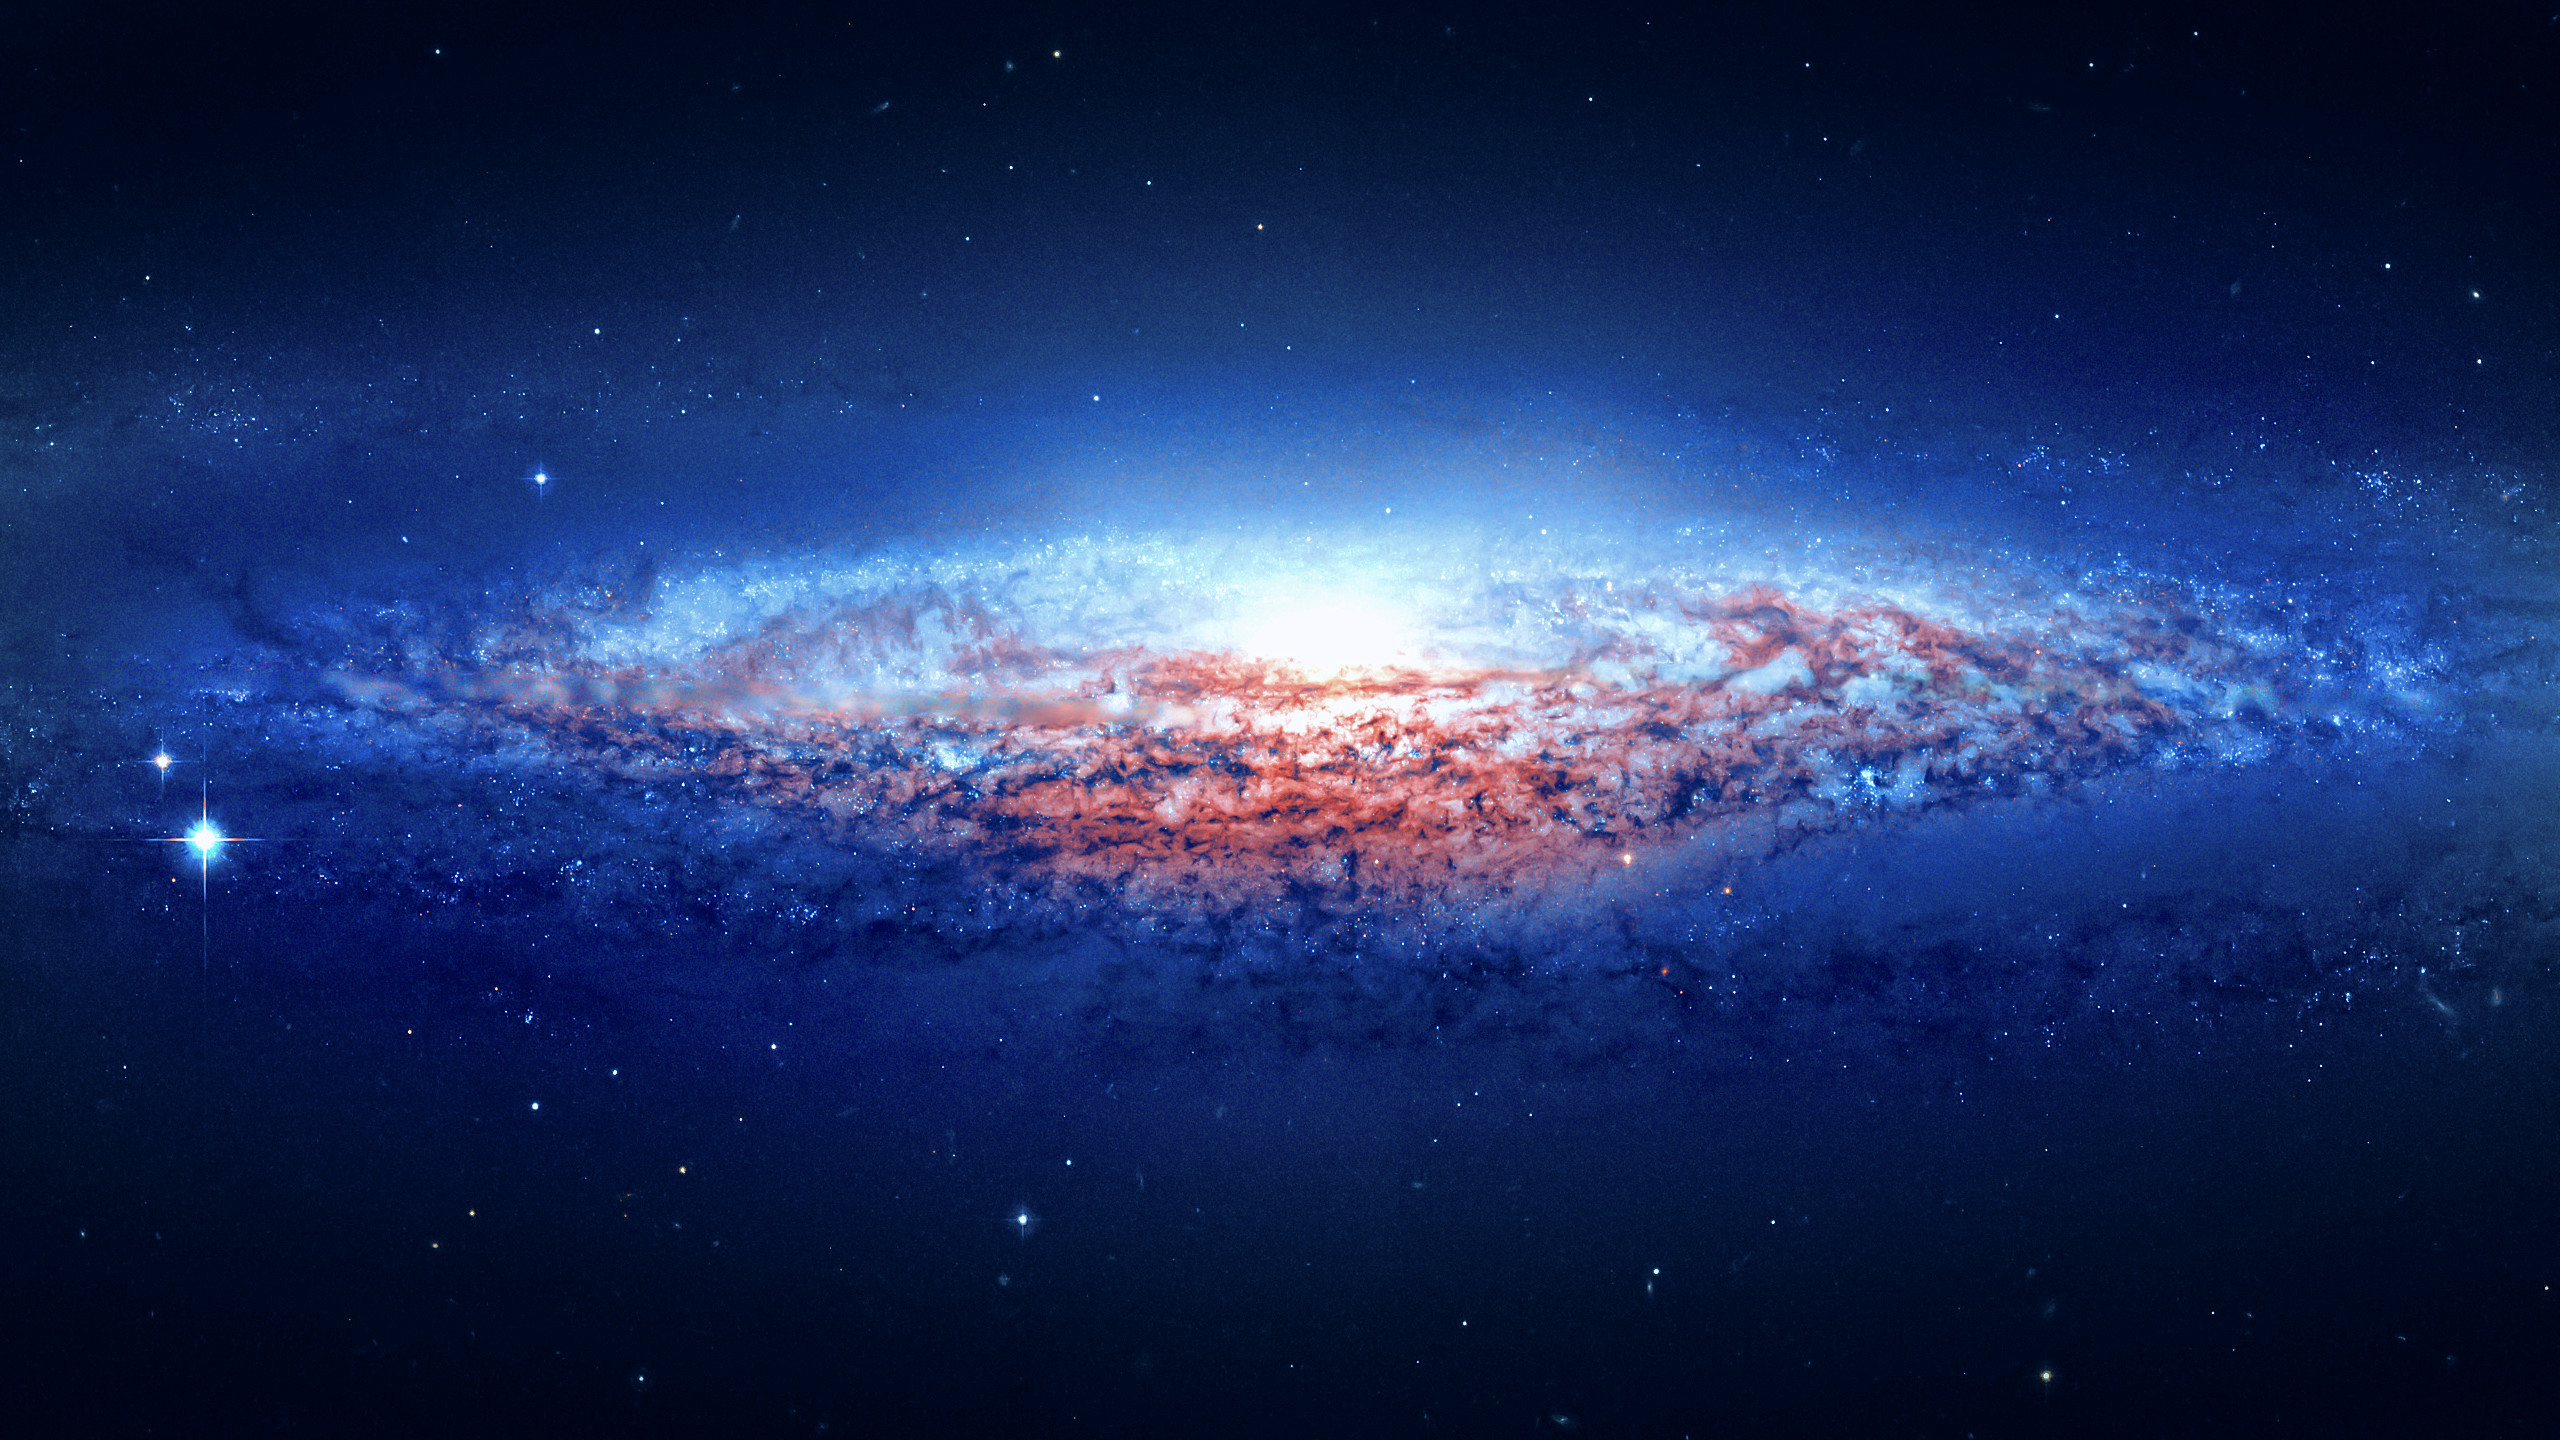 2560x1440 100+ Cool Galaxy Backgrounds for PC - SiWallpaperHD 34725